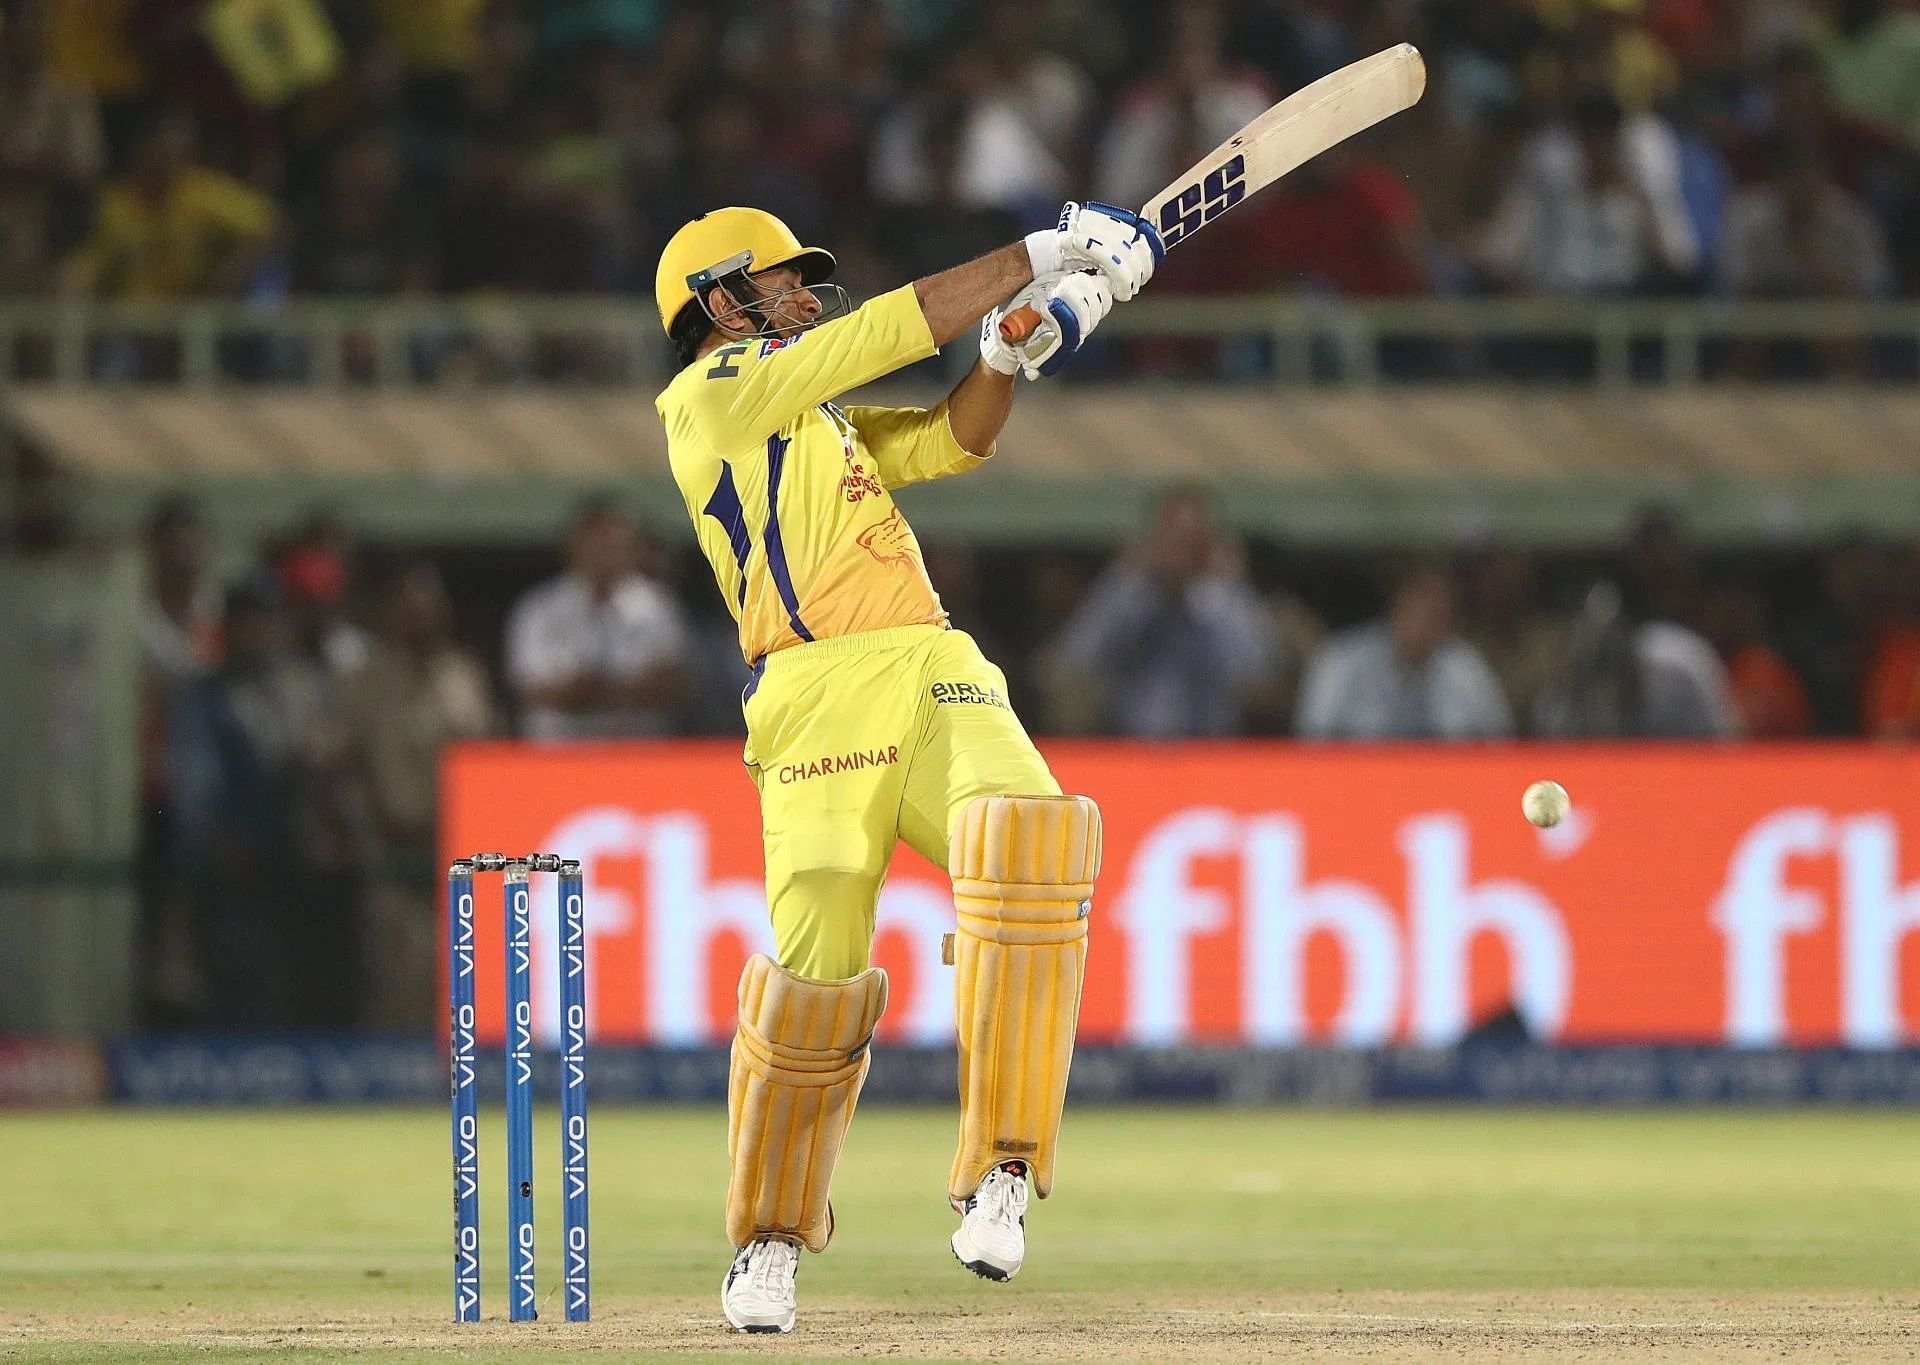 MS Dhoni played a few crucial knocks for CSK in IPL 2022. [P/C: iplt20.com]